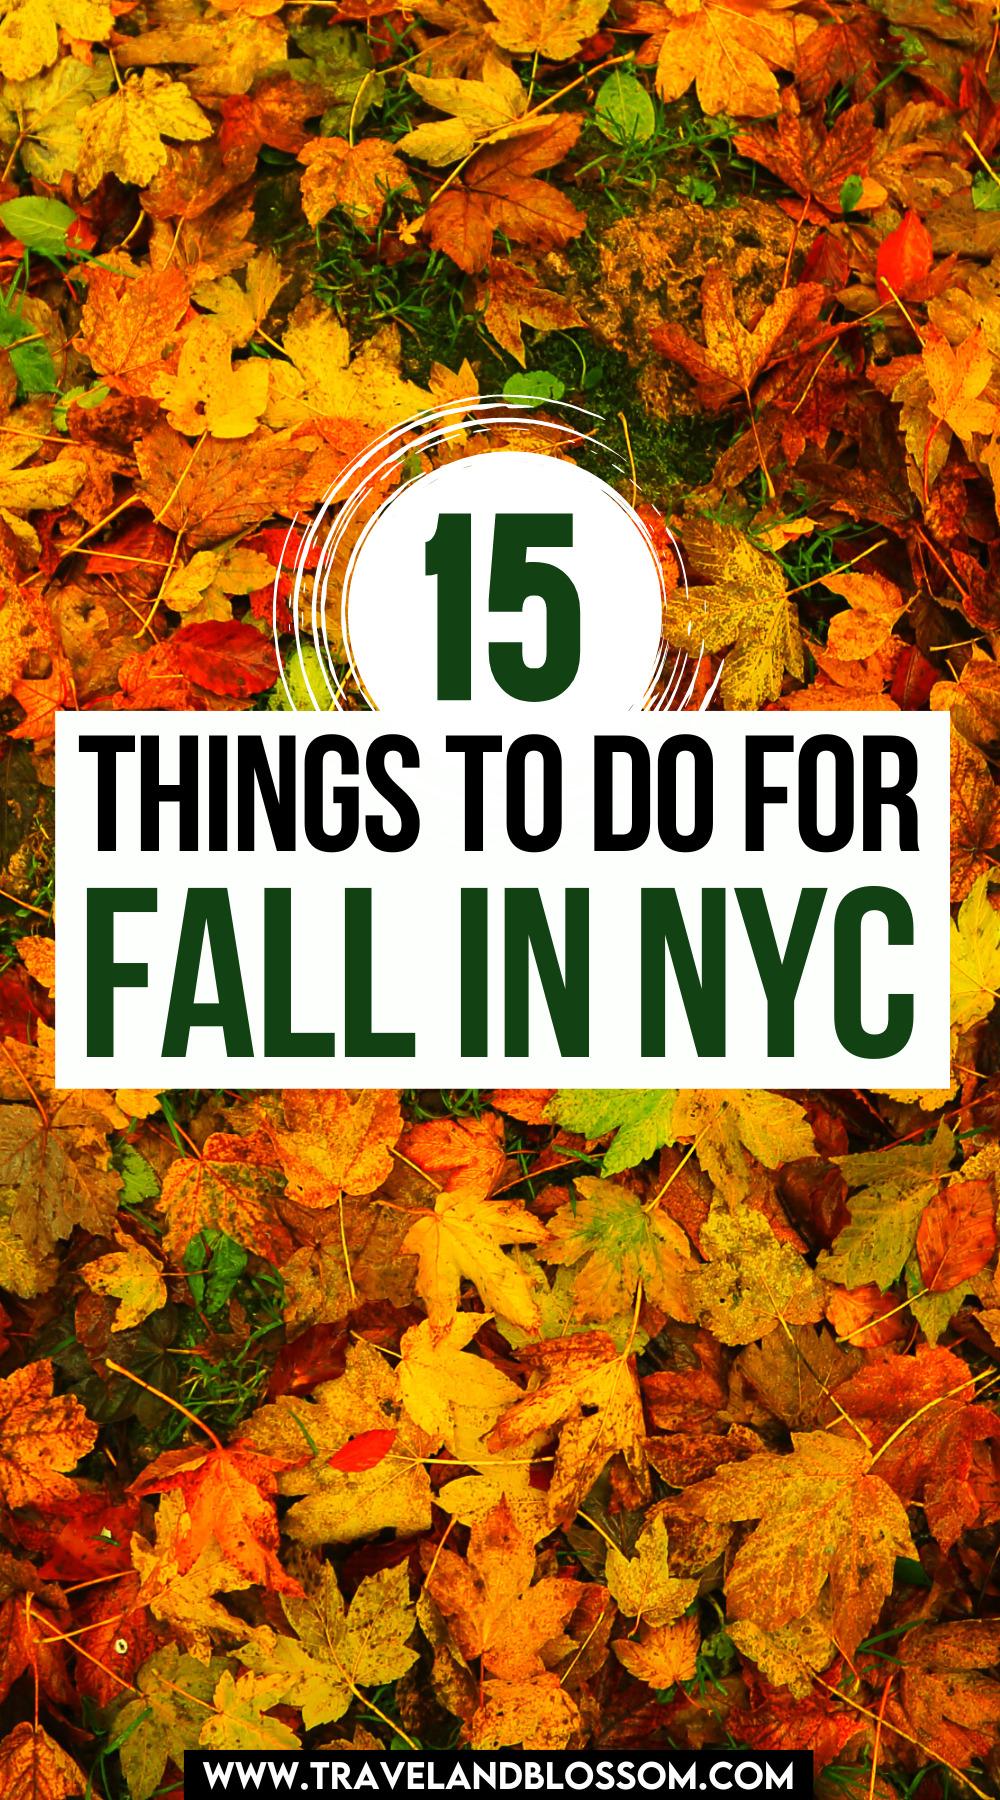 15 Incredible Things to Do for Fall in NYC